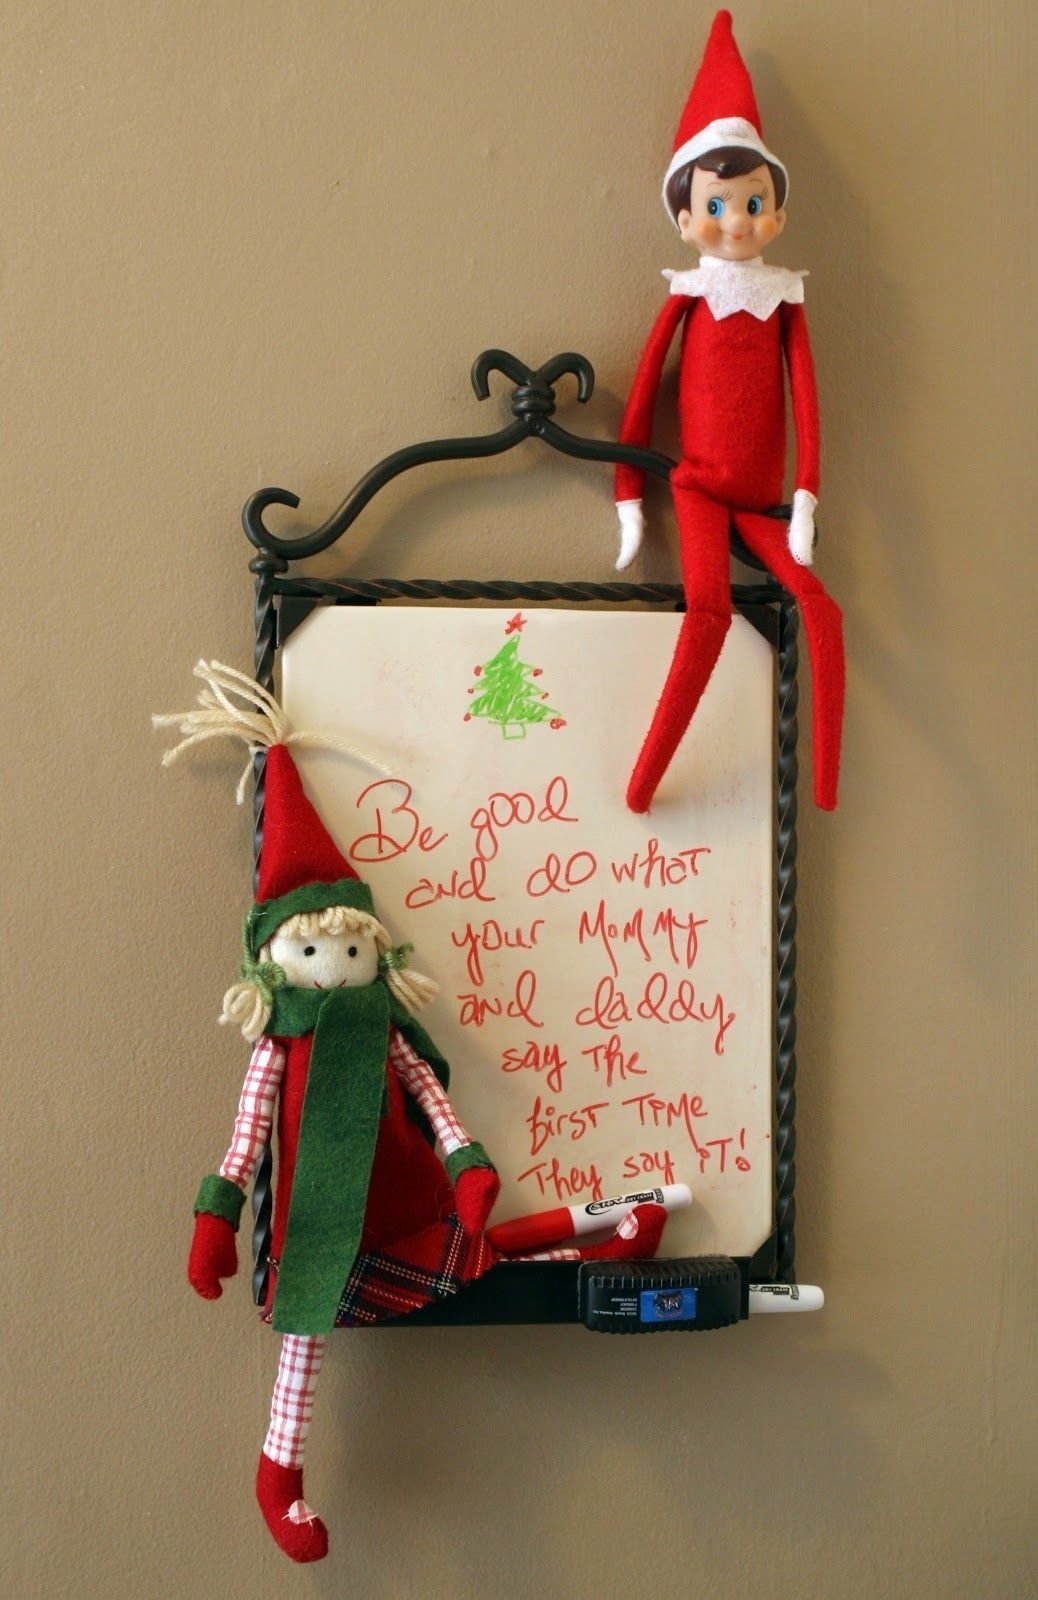 10 Lovable Elf On The Shelf Ideas Pinterest elf on a shelf ideas cooper could draw a picture of santa on the 2022